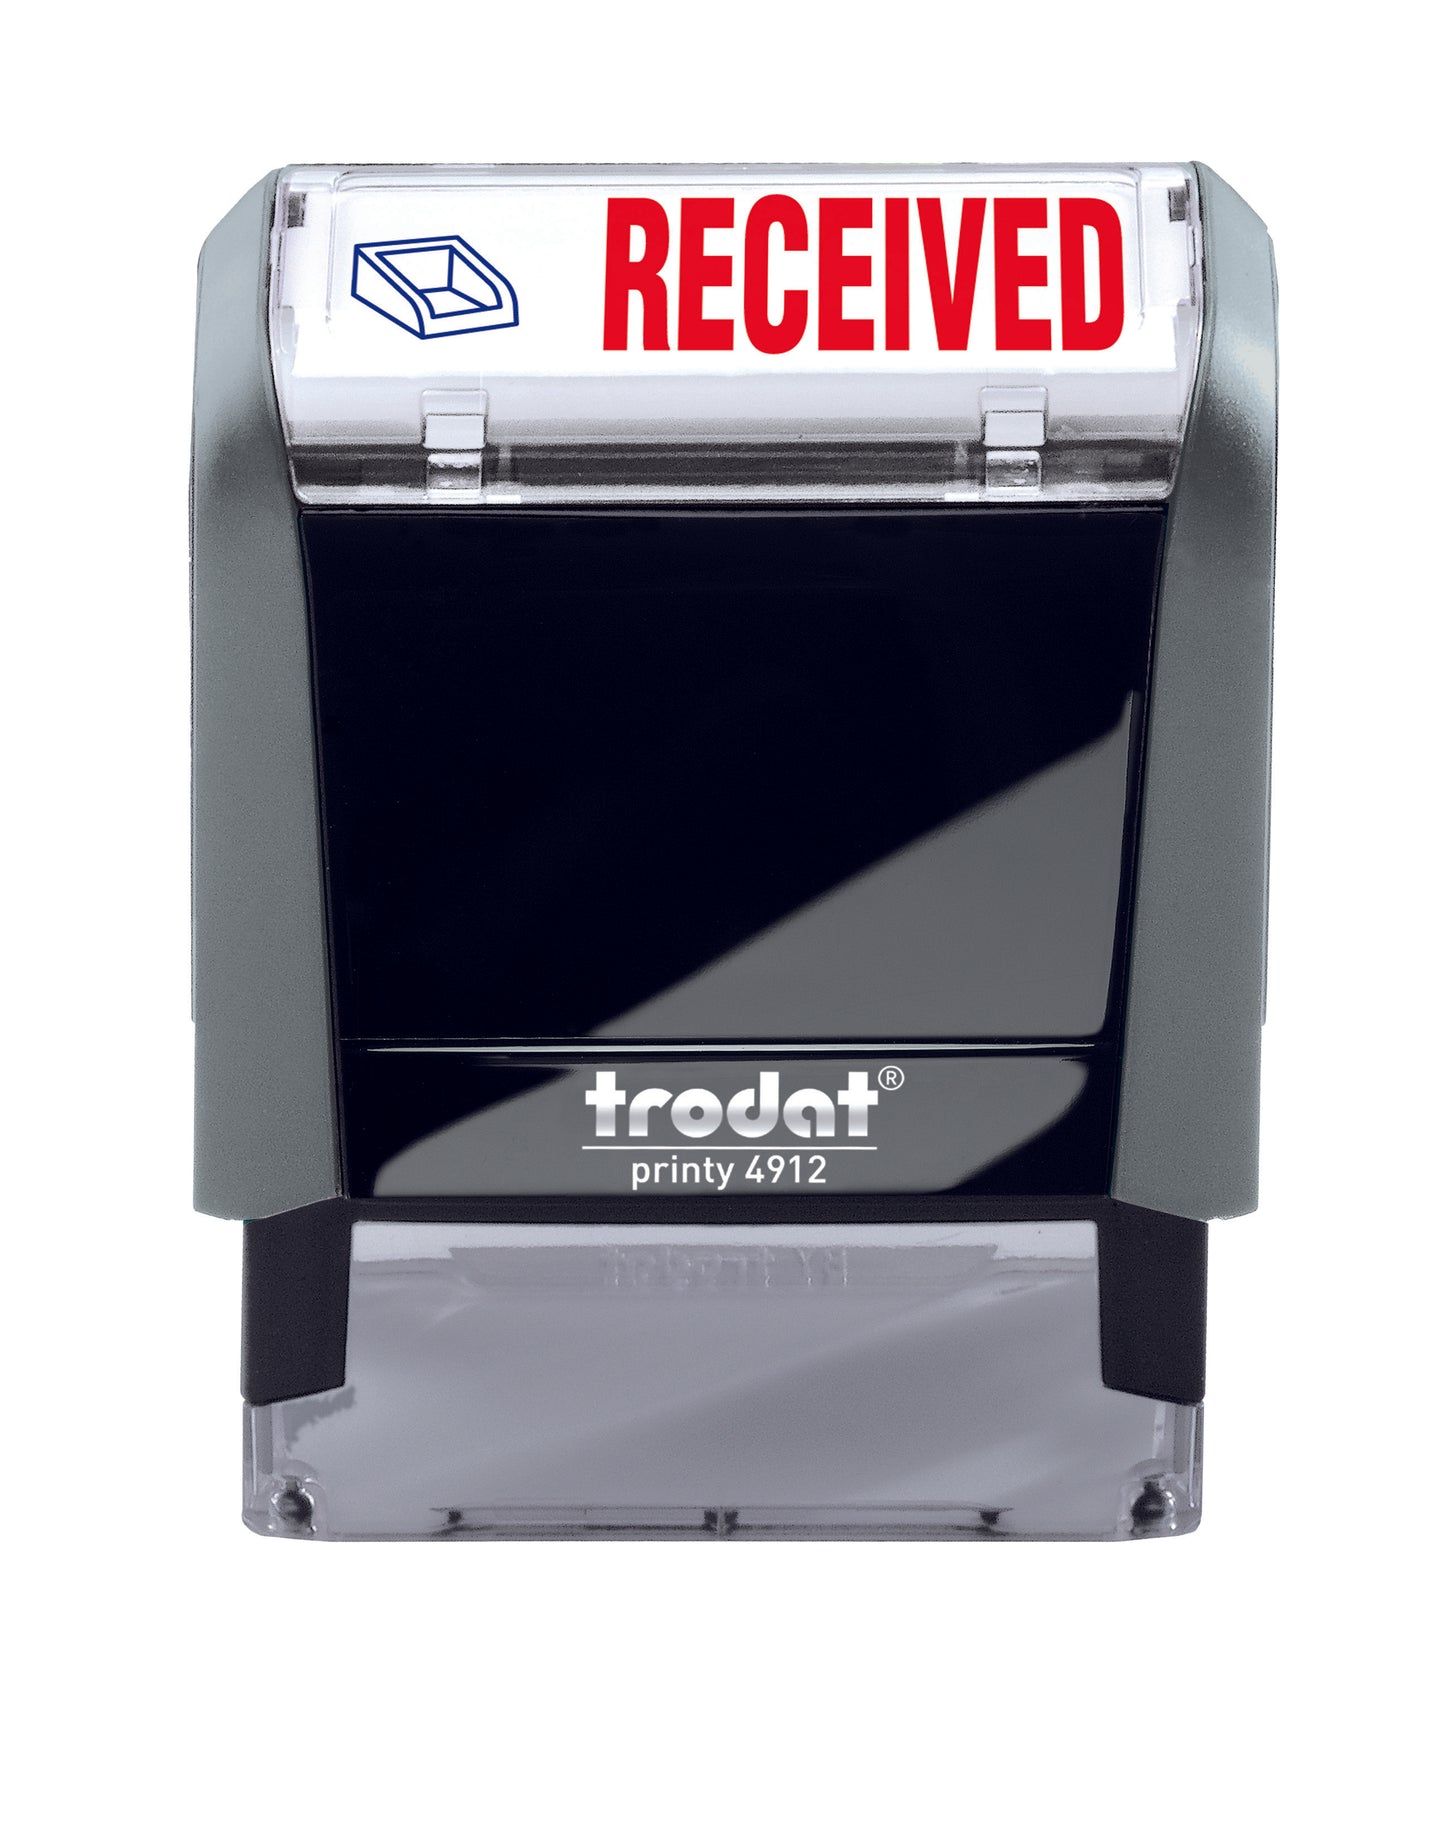 Trodat RECEIVED Ideal 4912 Custom Self-Inking Rubber Stamp